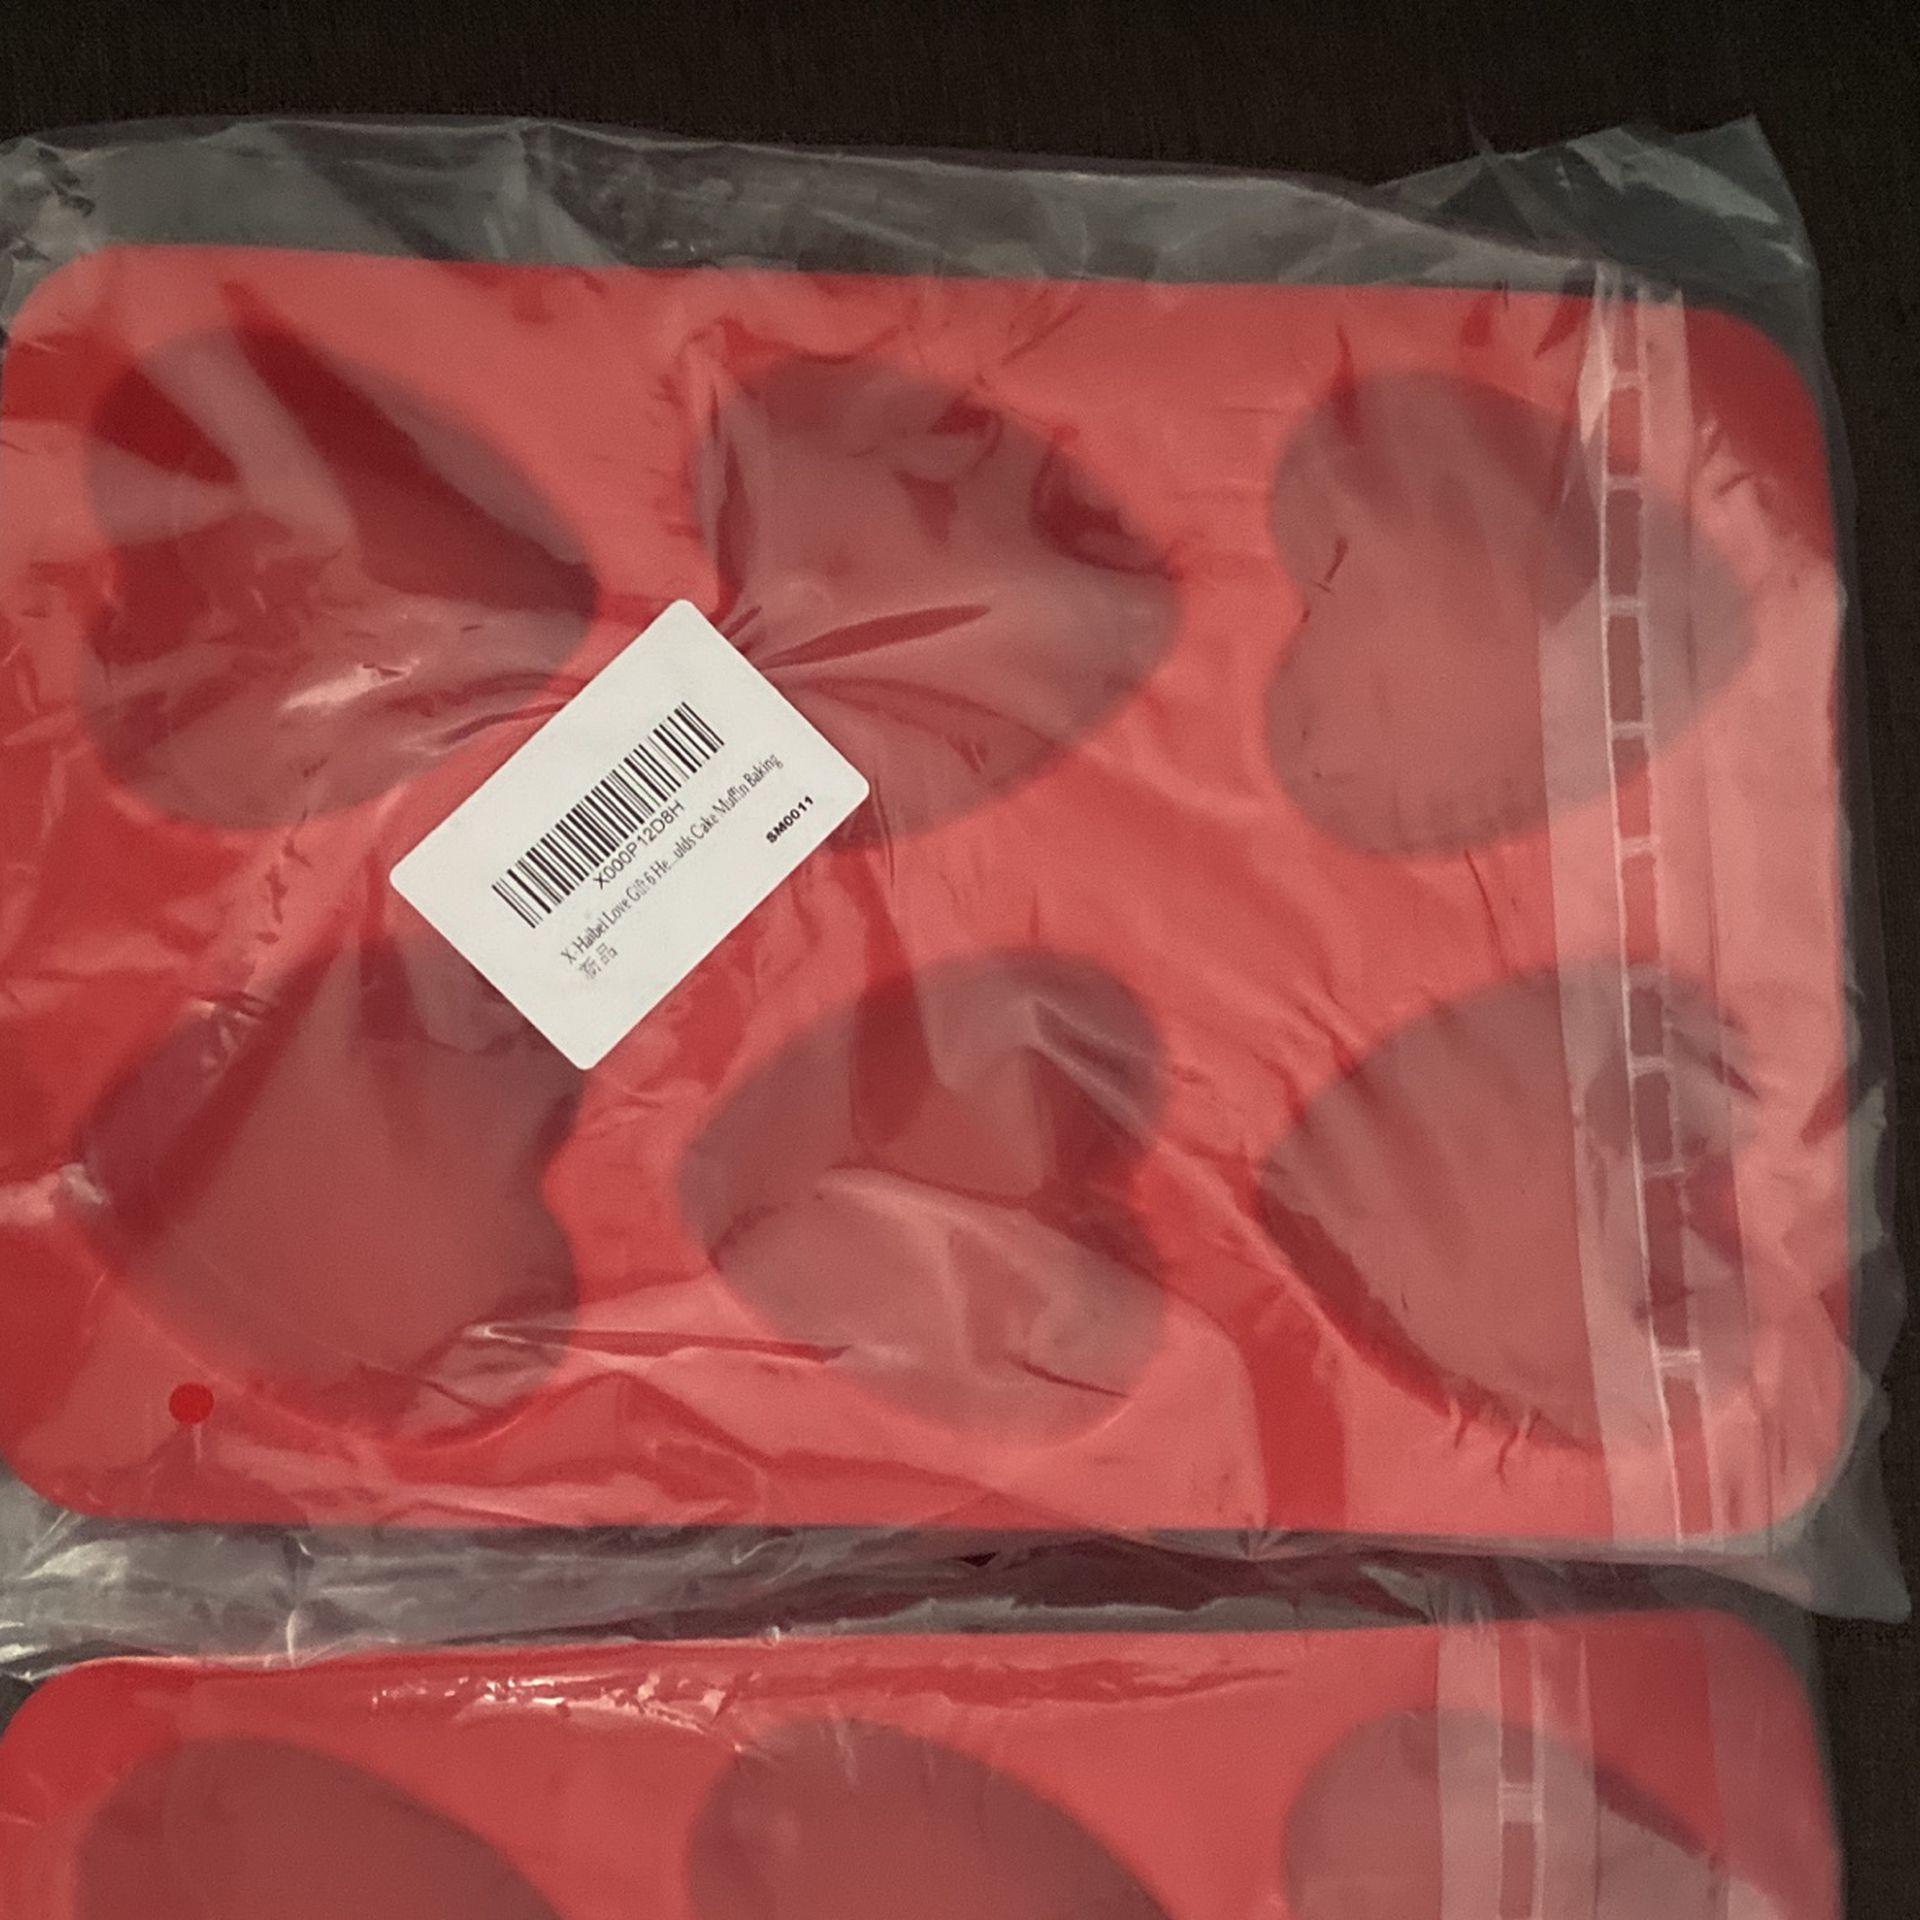 BRAND NEE Heart Silicon Molds 2 For $6